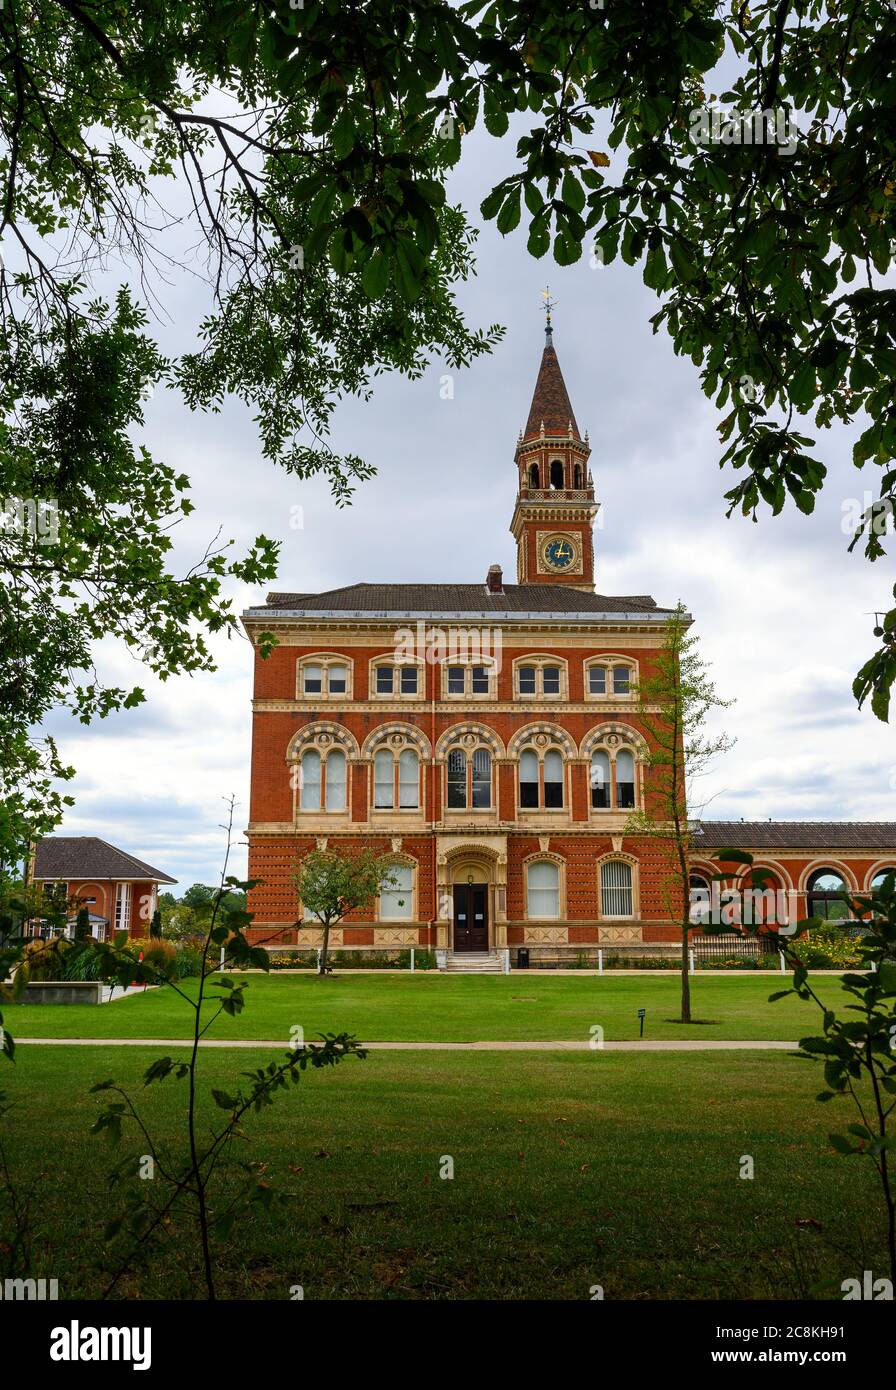 Dulwich College boys school. View of the South Block (one of the Barry Buildings) with clock tower seen through trees. Dulwich is in south London. Stock Photo